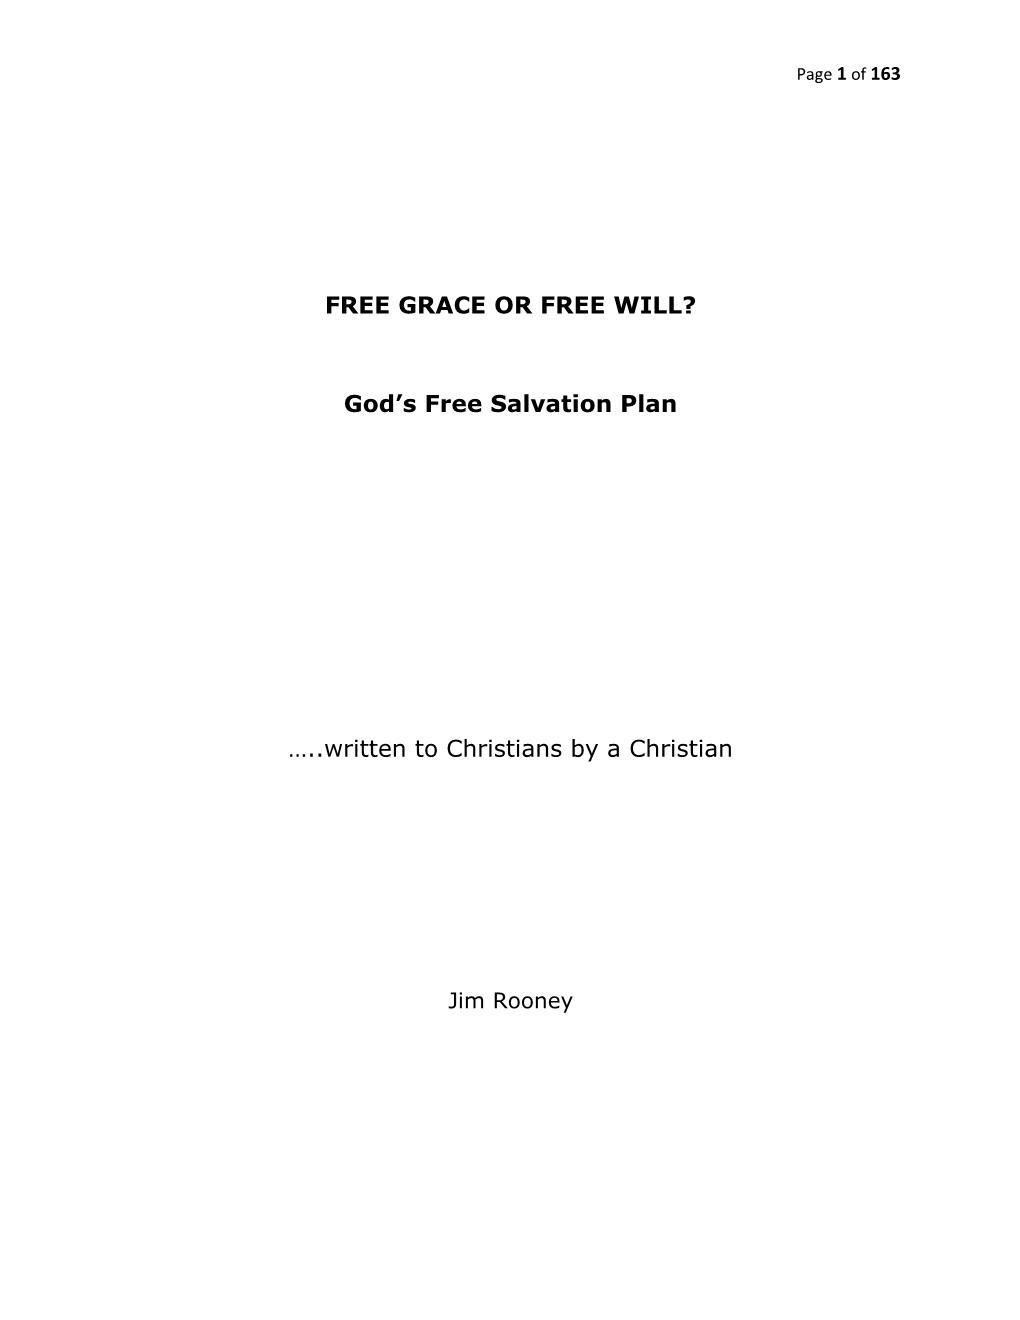 Free Grace Or Free Will?